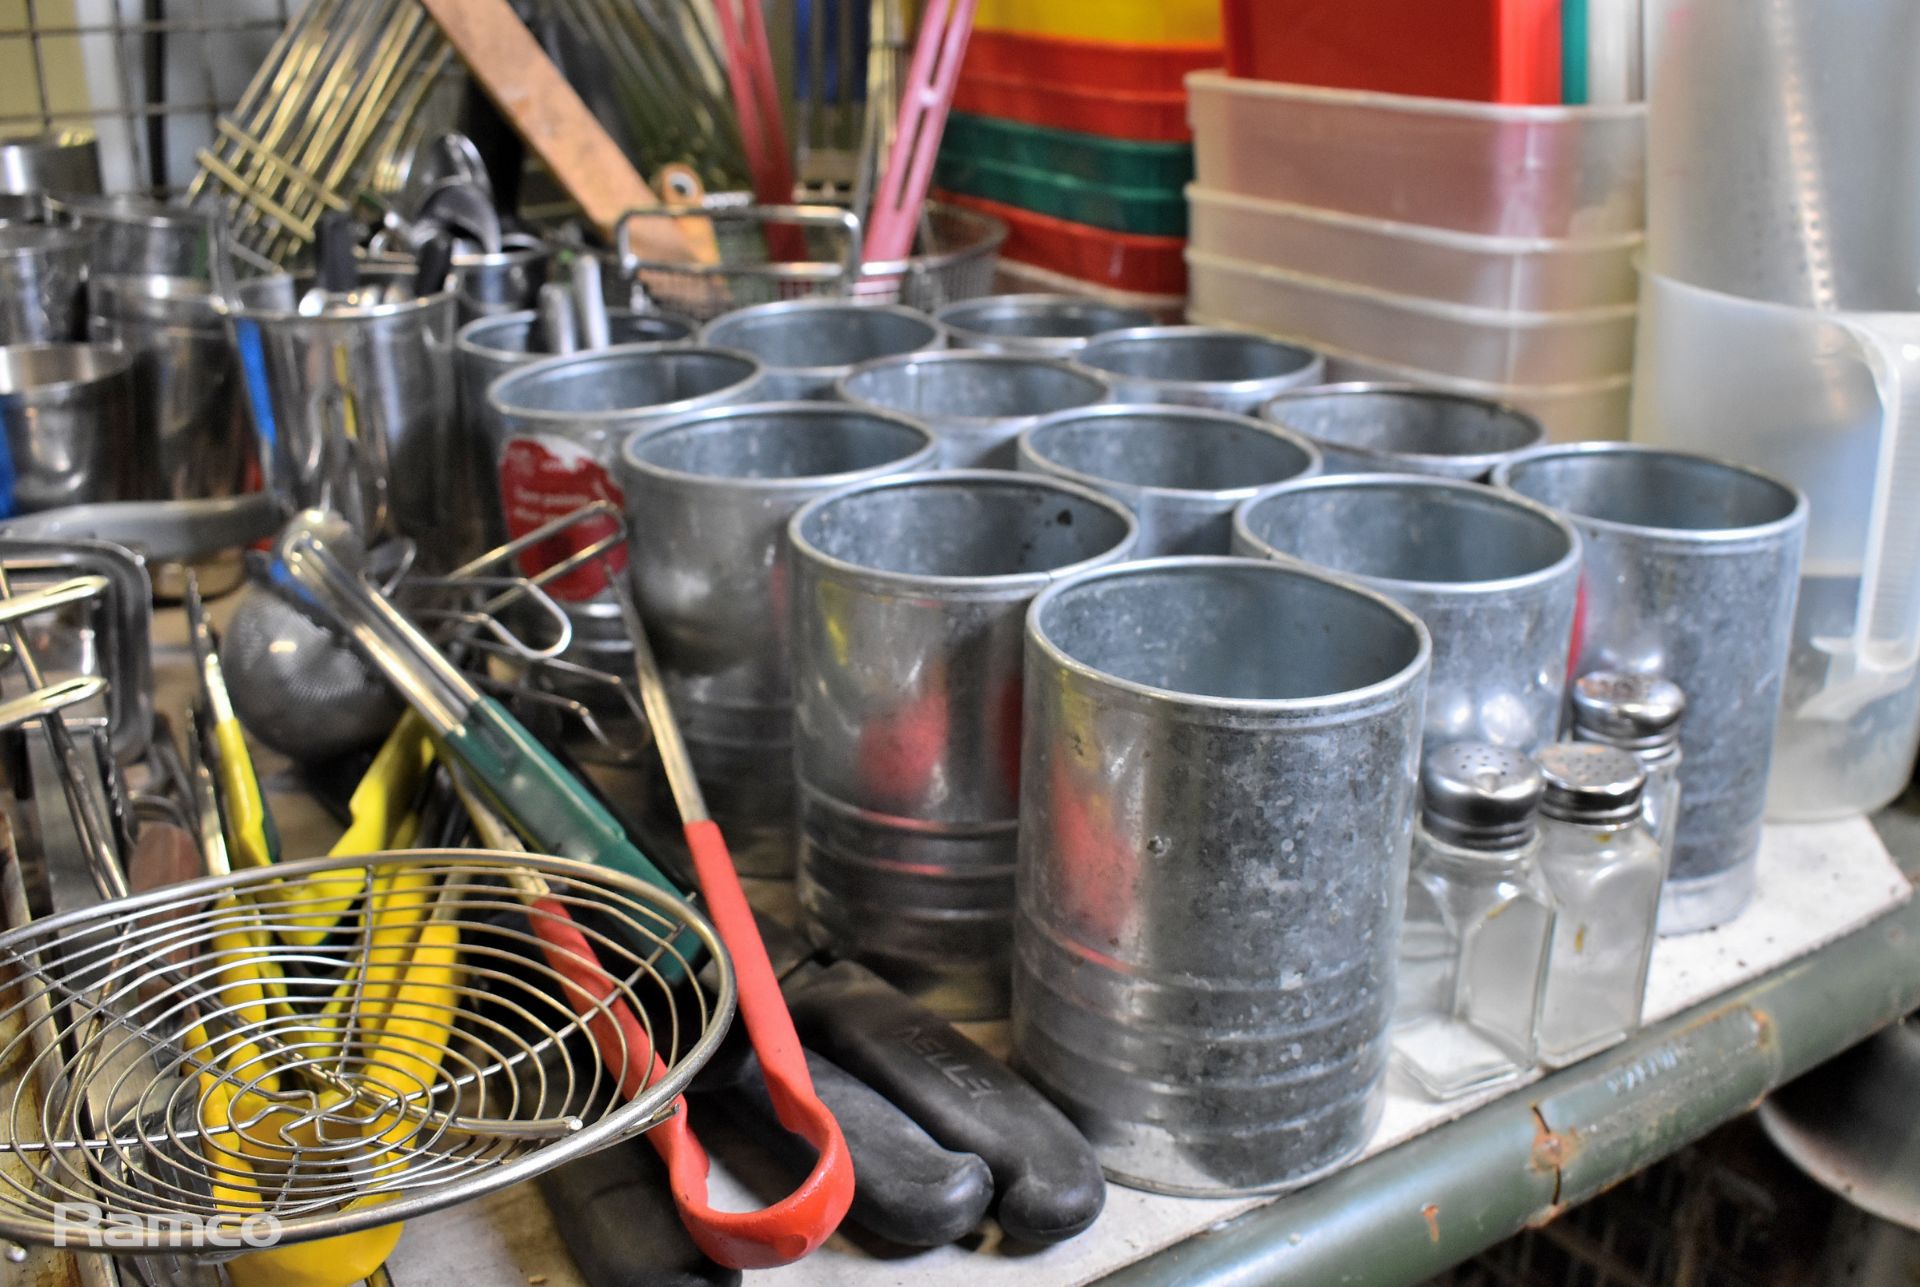 Catering equipment - pans, oven cooking trays, colanders, cutlery and utensils - Image 5 of 6